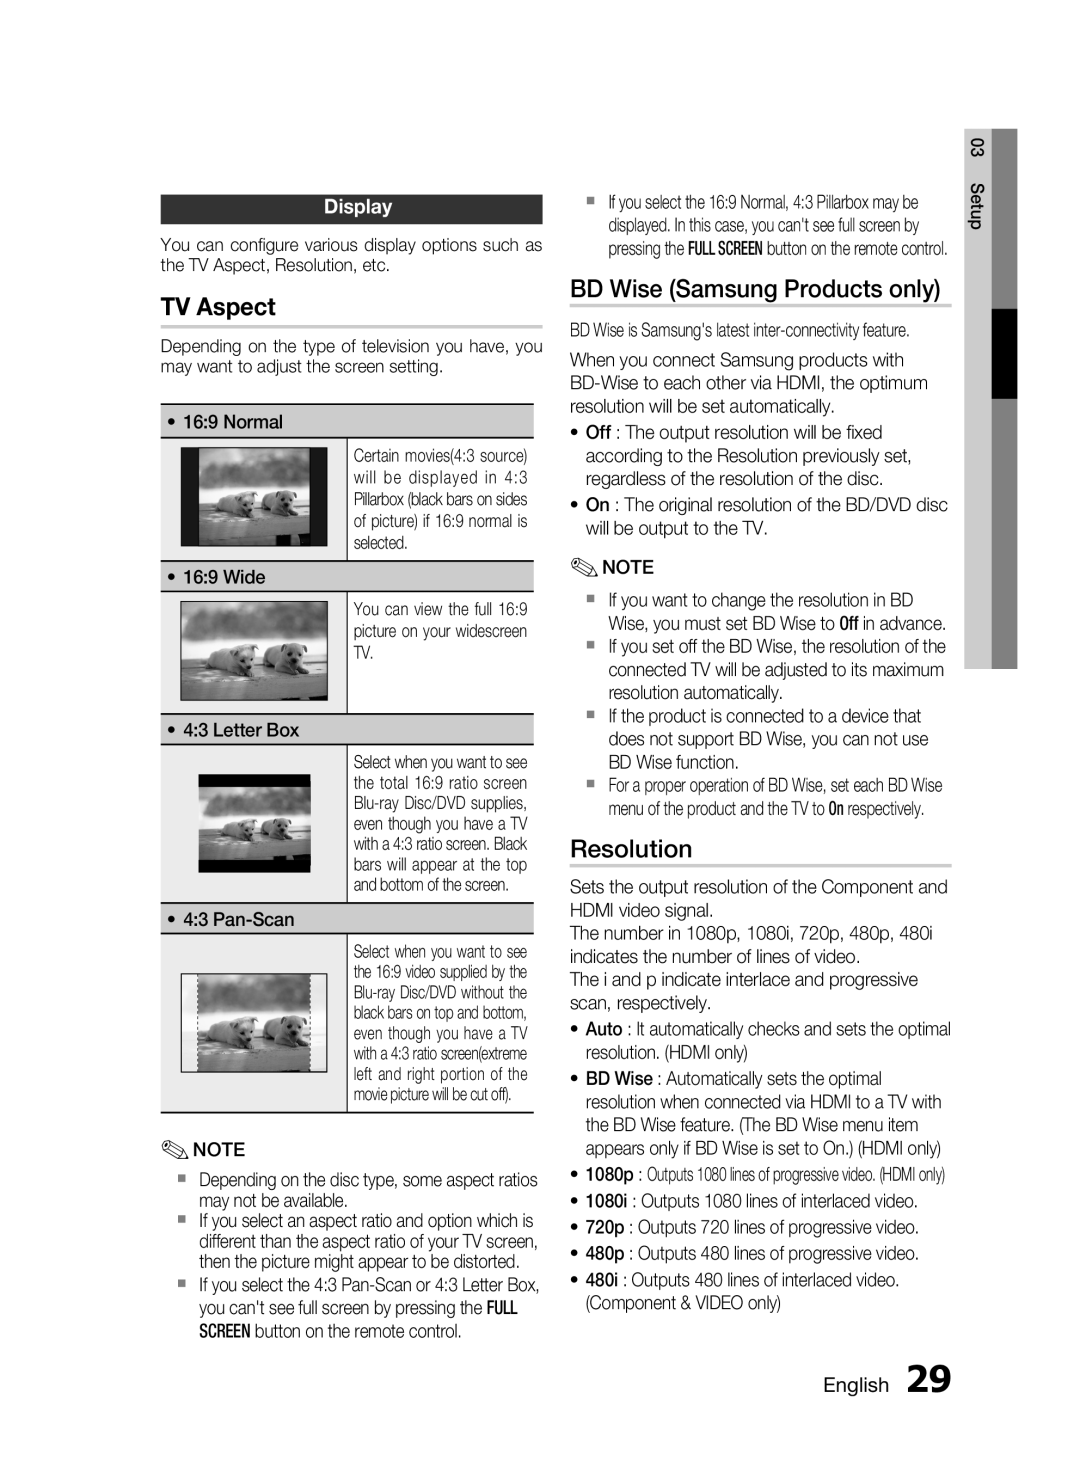 Samsung AH68-02258S, HT-C5500 user manual TV Aspect, BD Wise Samsung Products only, Resolution, Display, English 